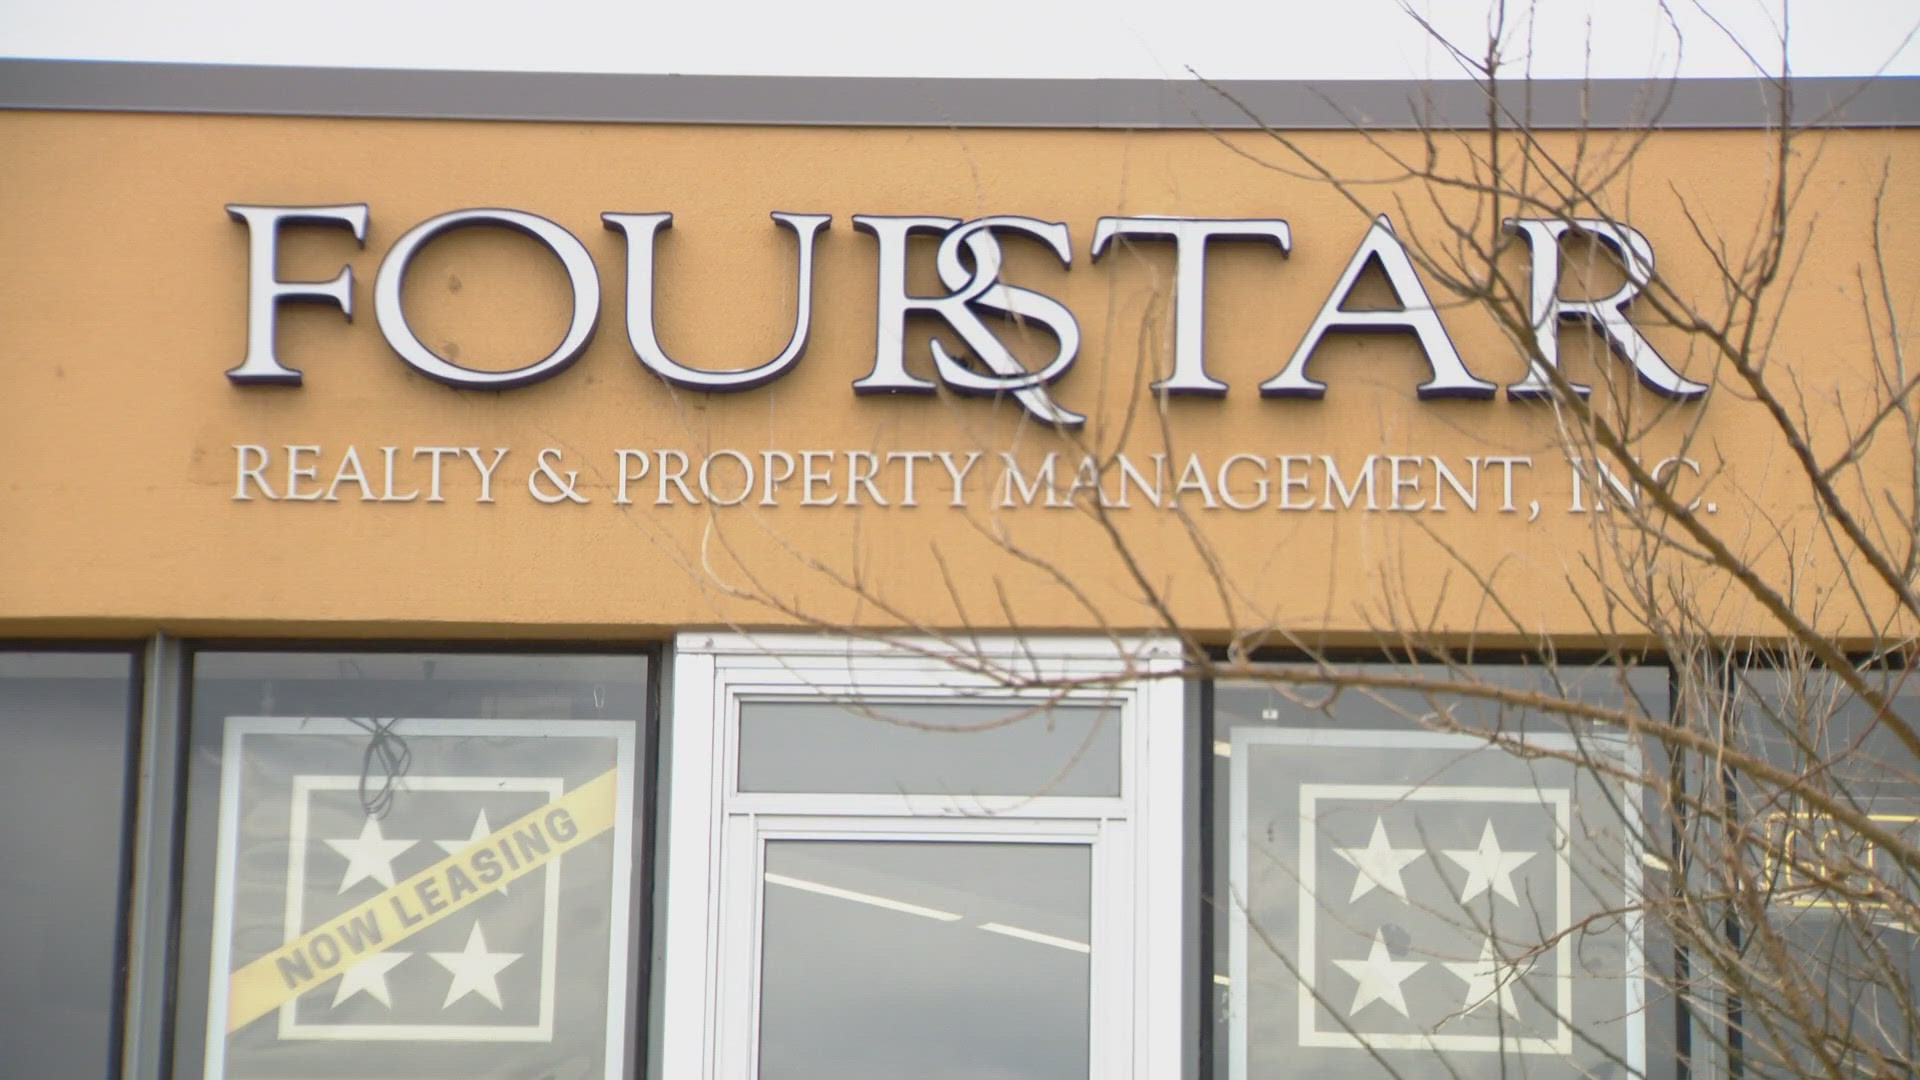 The company agreed to pay the state about $1 million that will be used for tenant restitution.